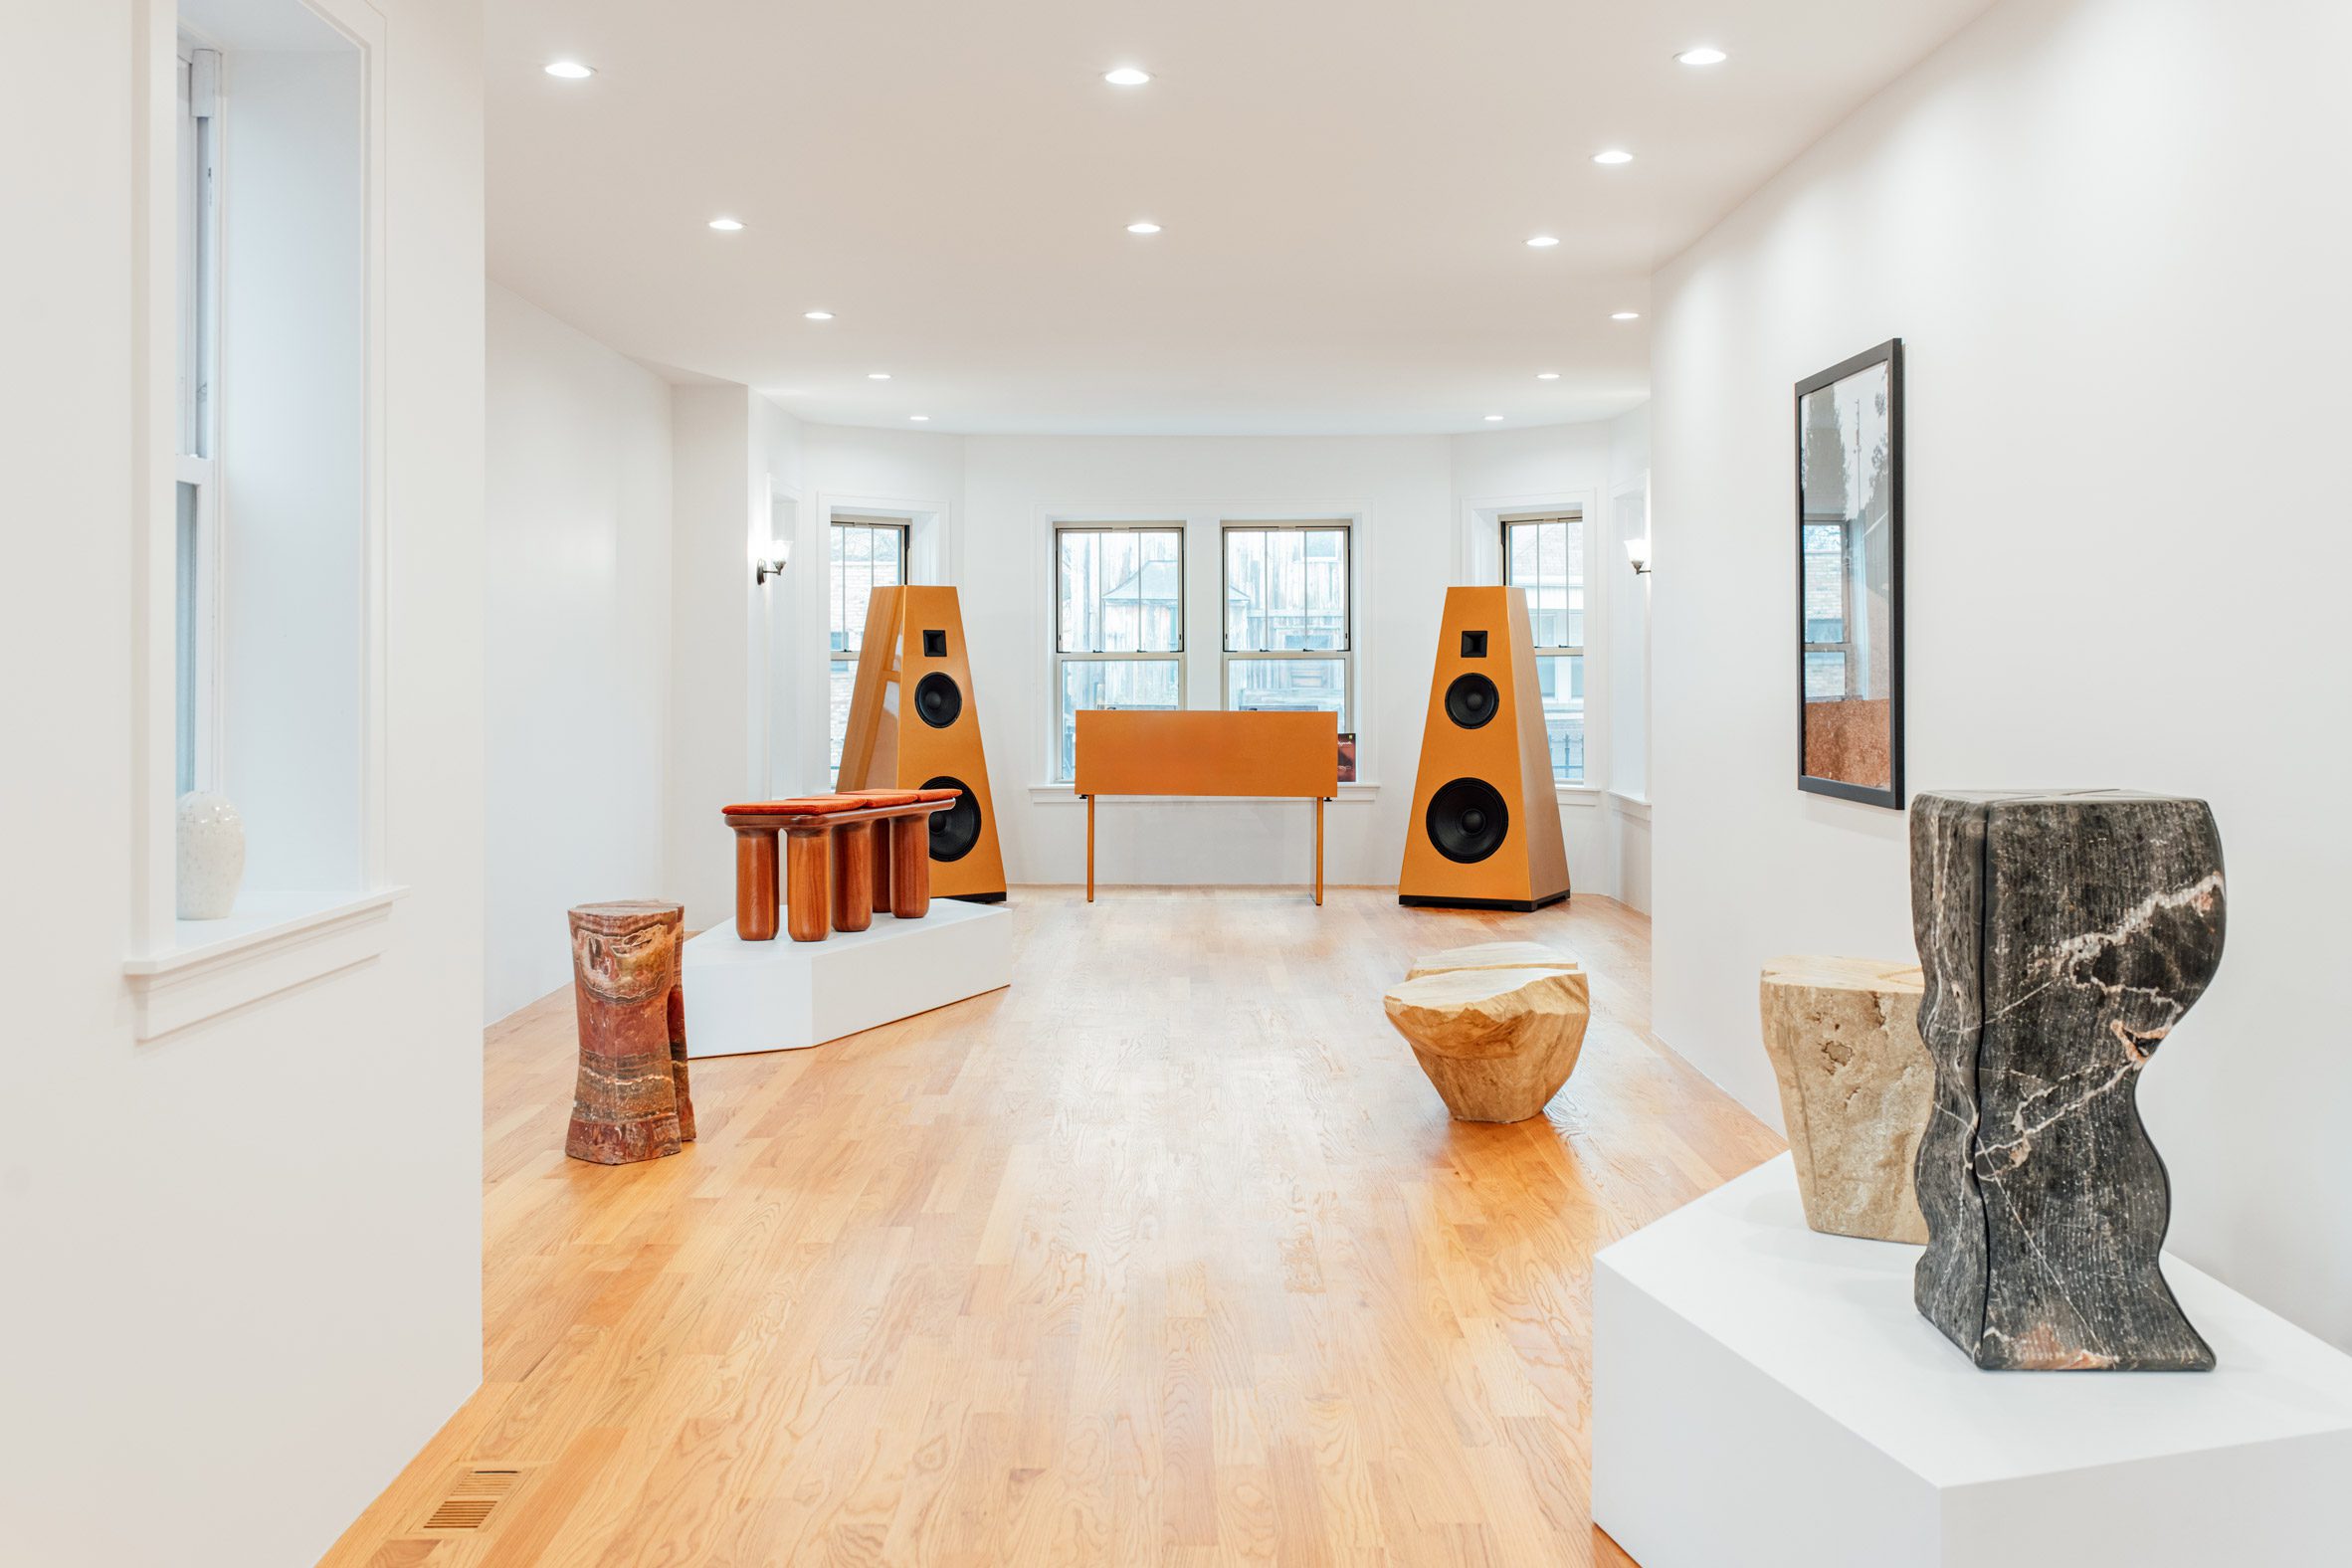 Large speakers and furniture in room